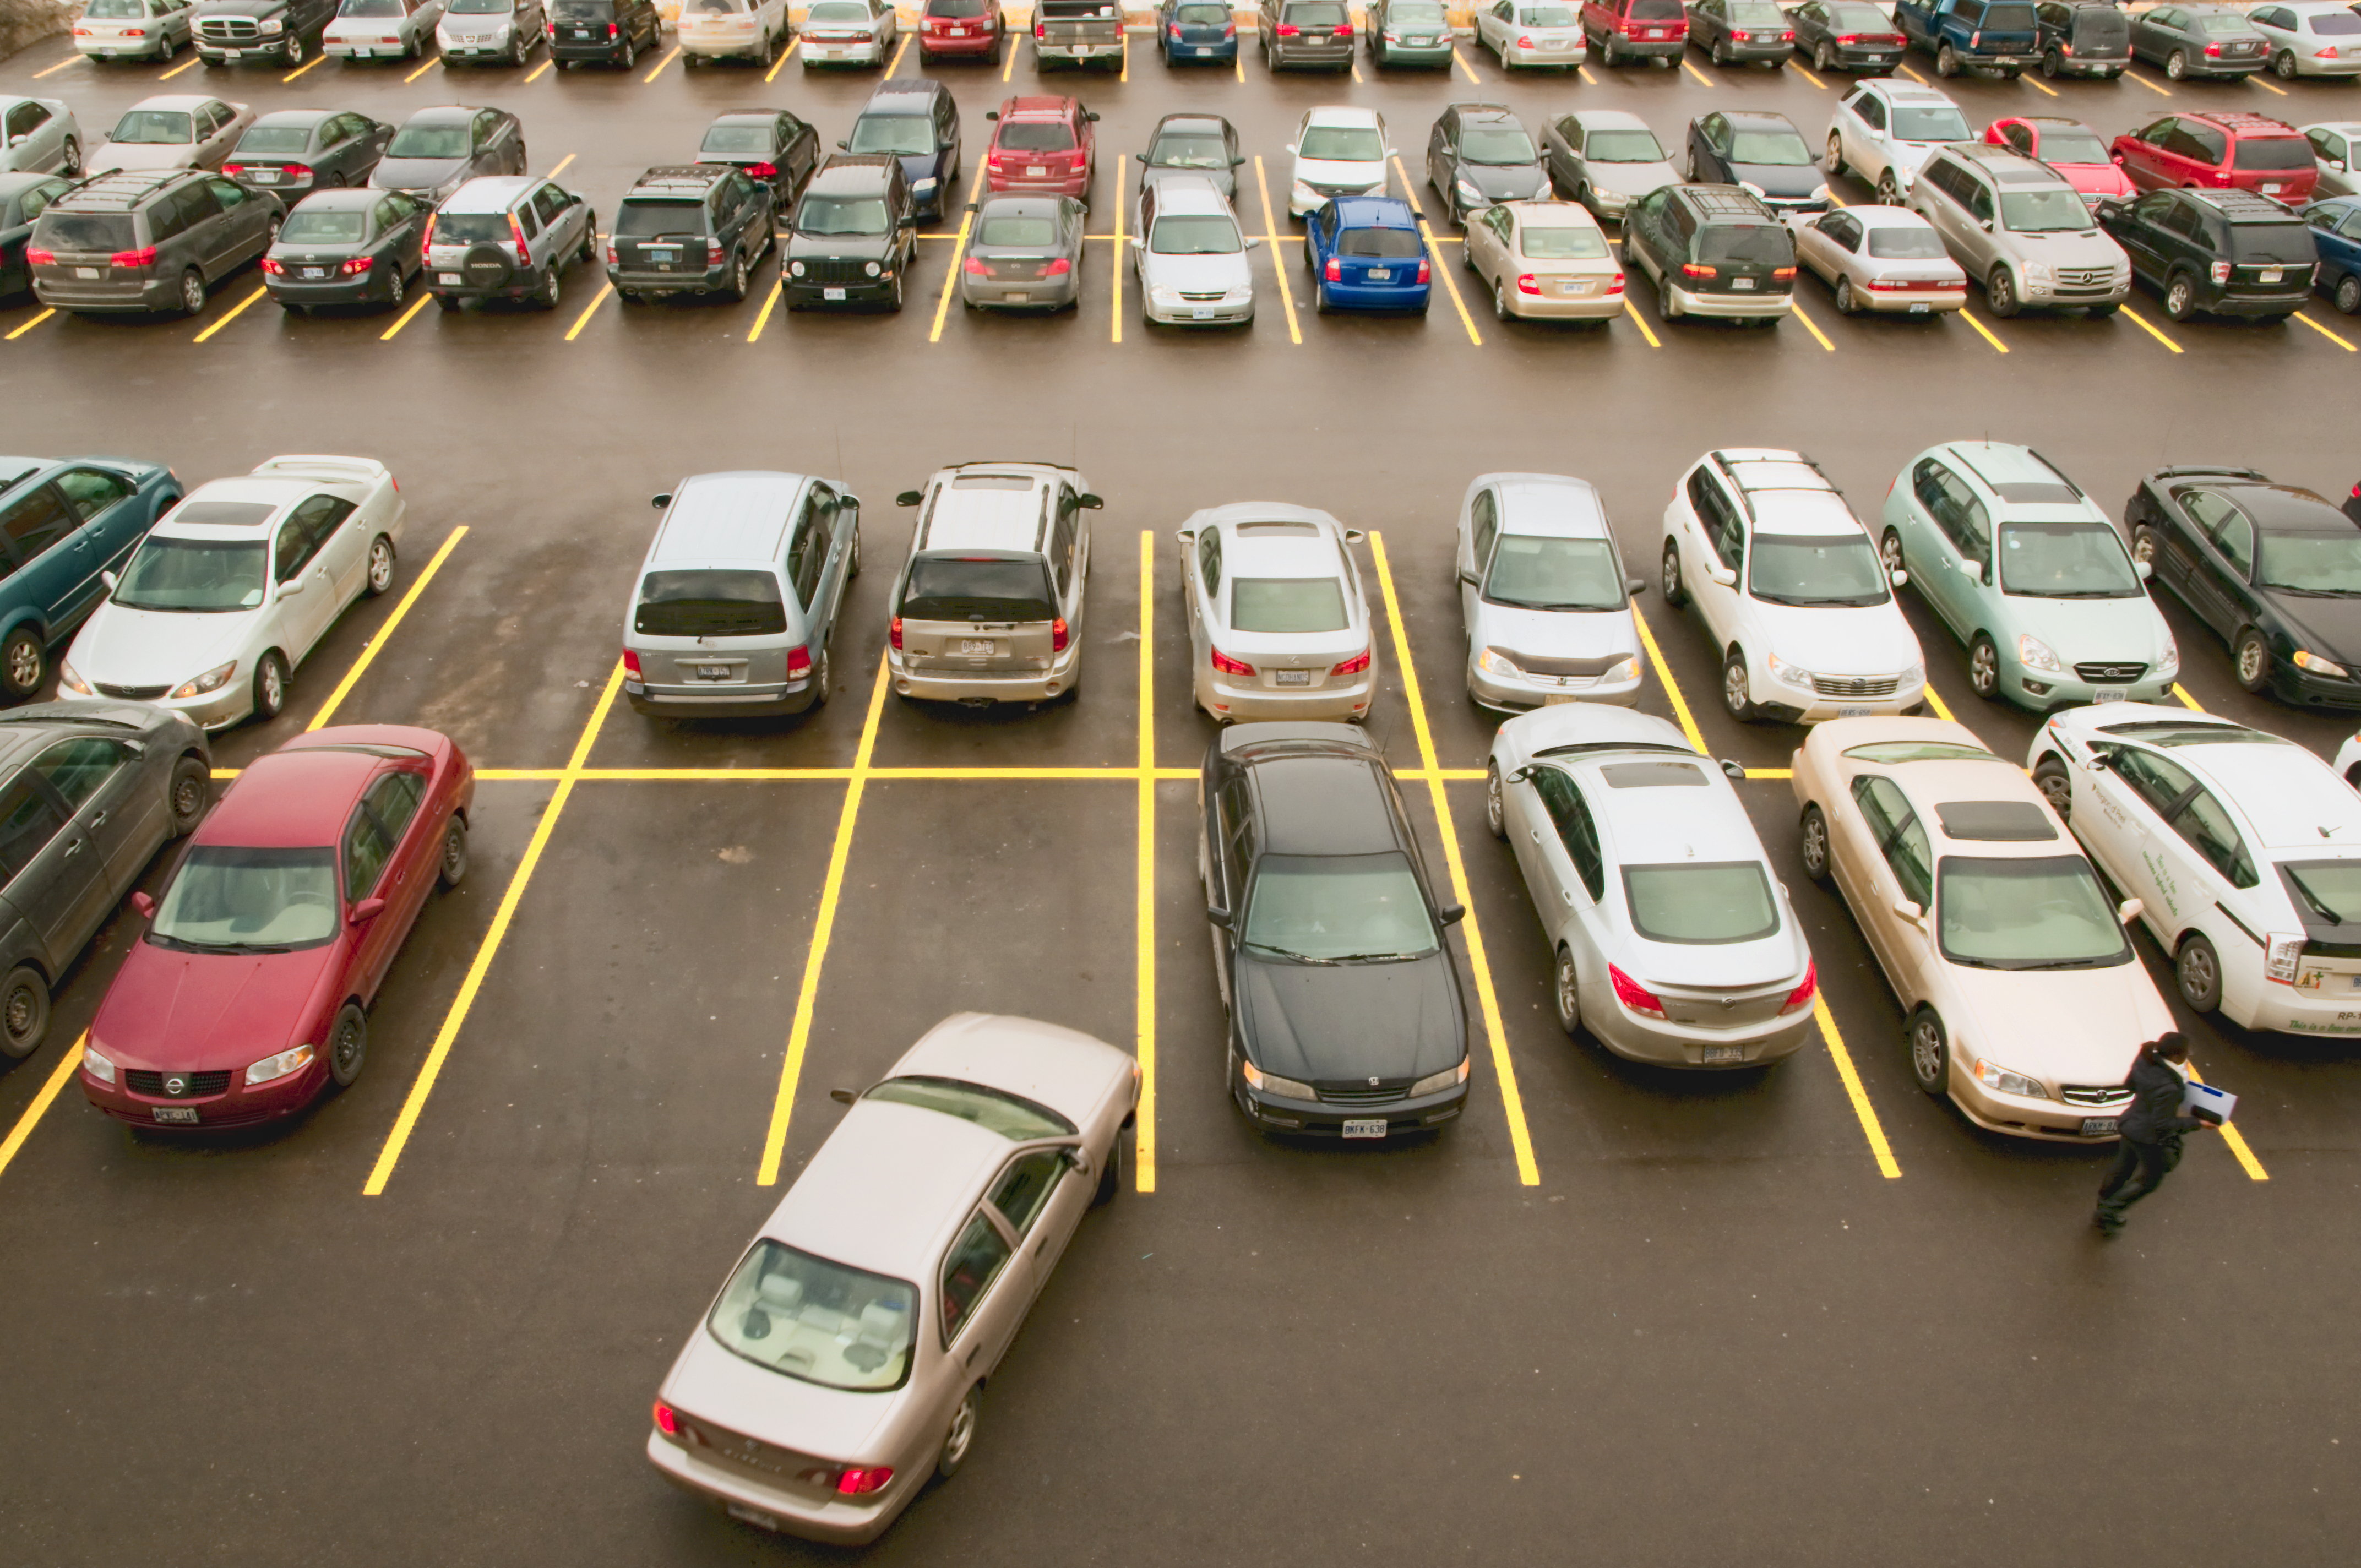 Top view looking down on parking lot, full with cars and shopper walking. (Gail Shotlander—Getty Images)